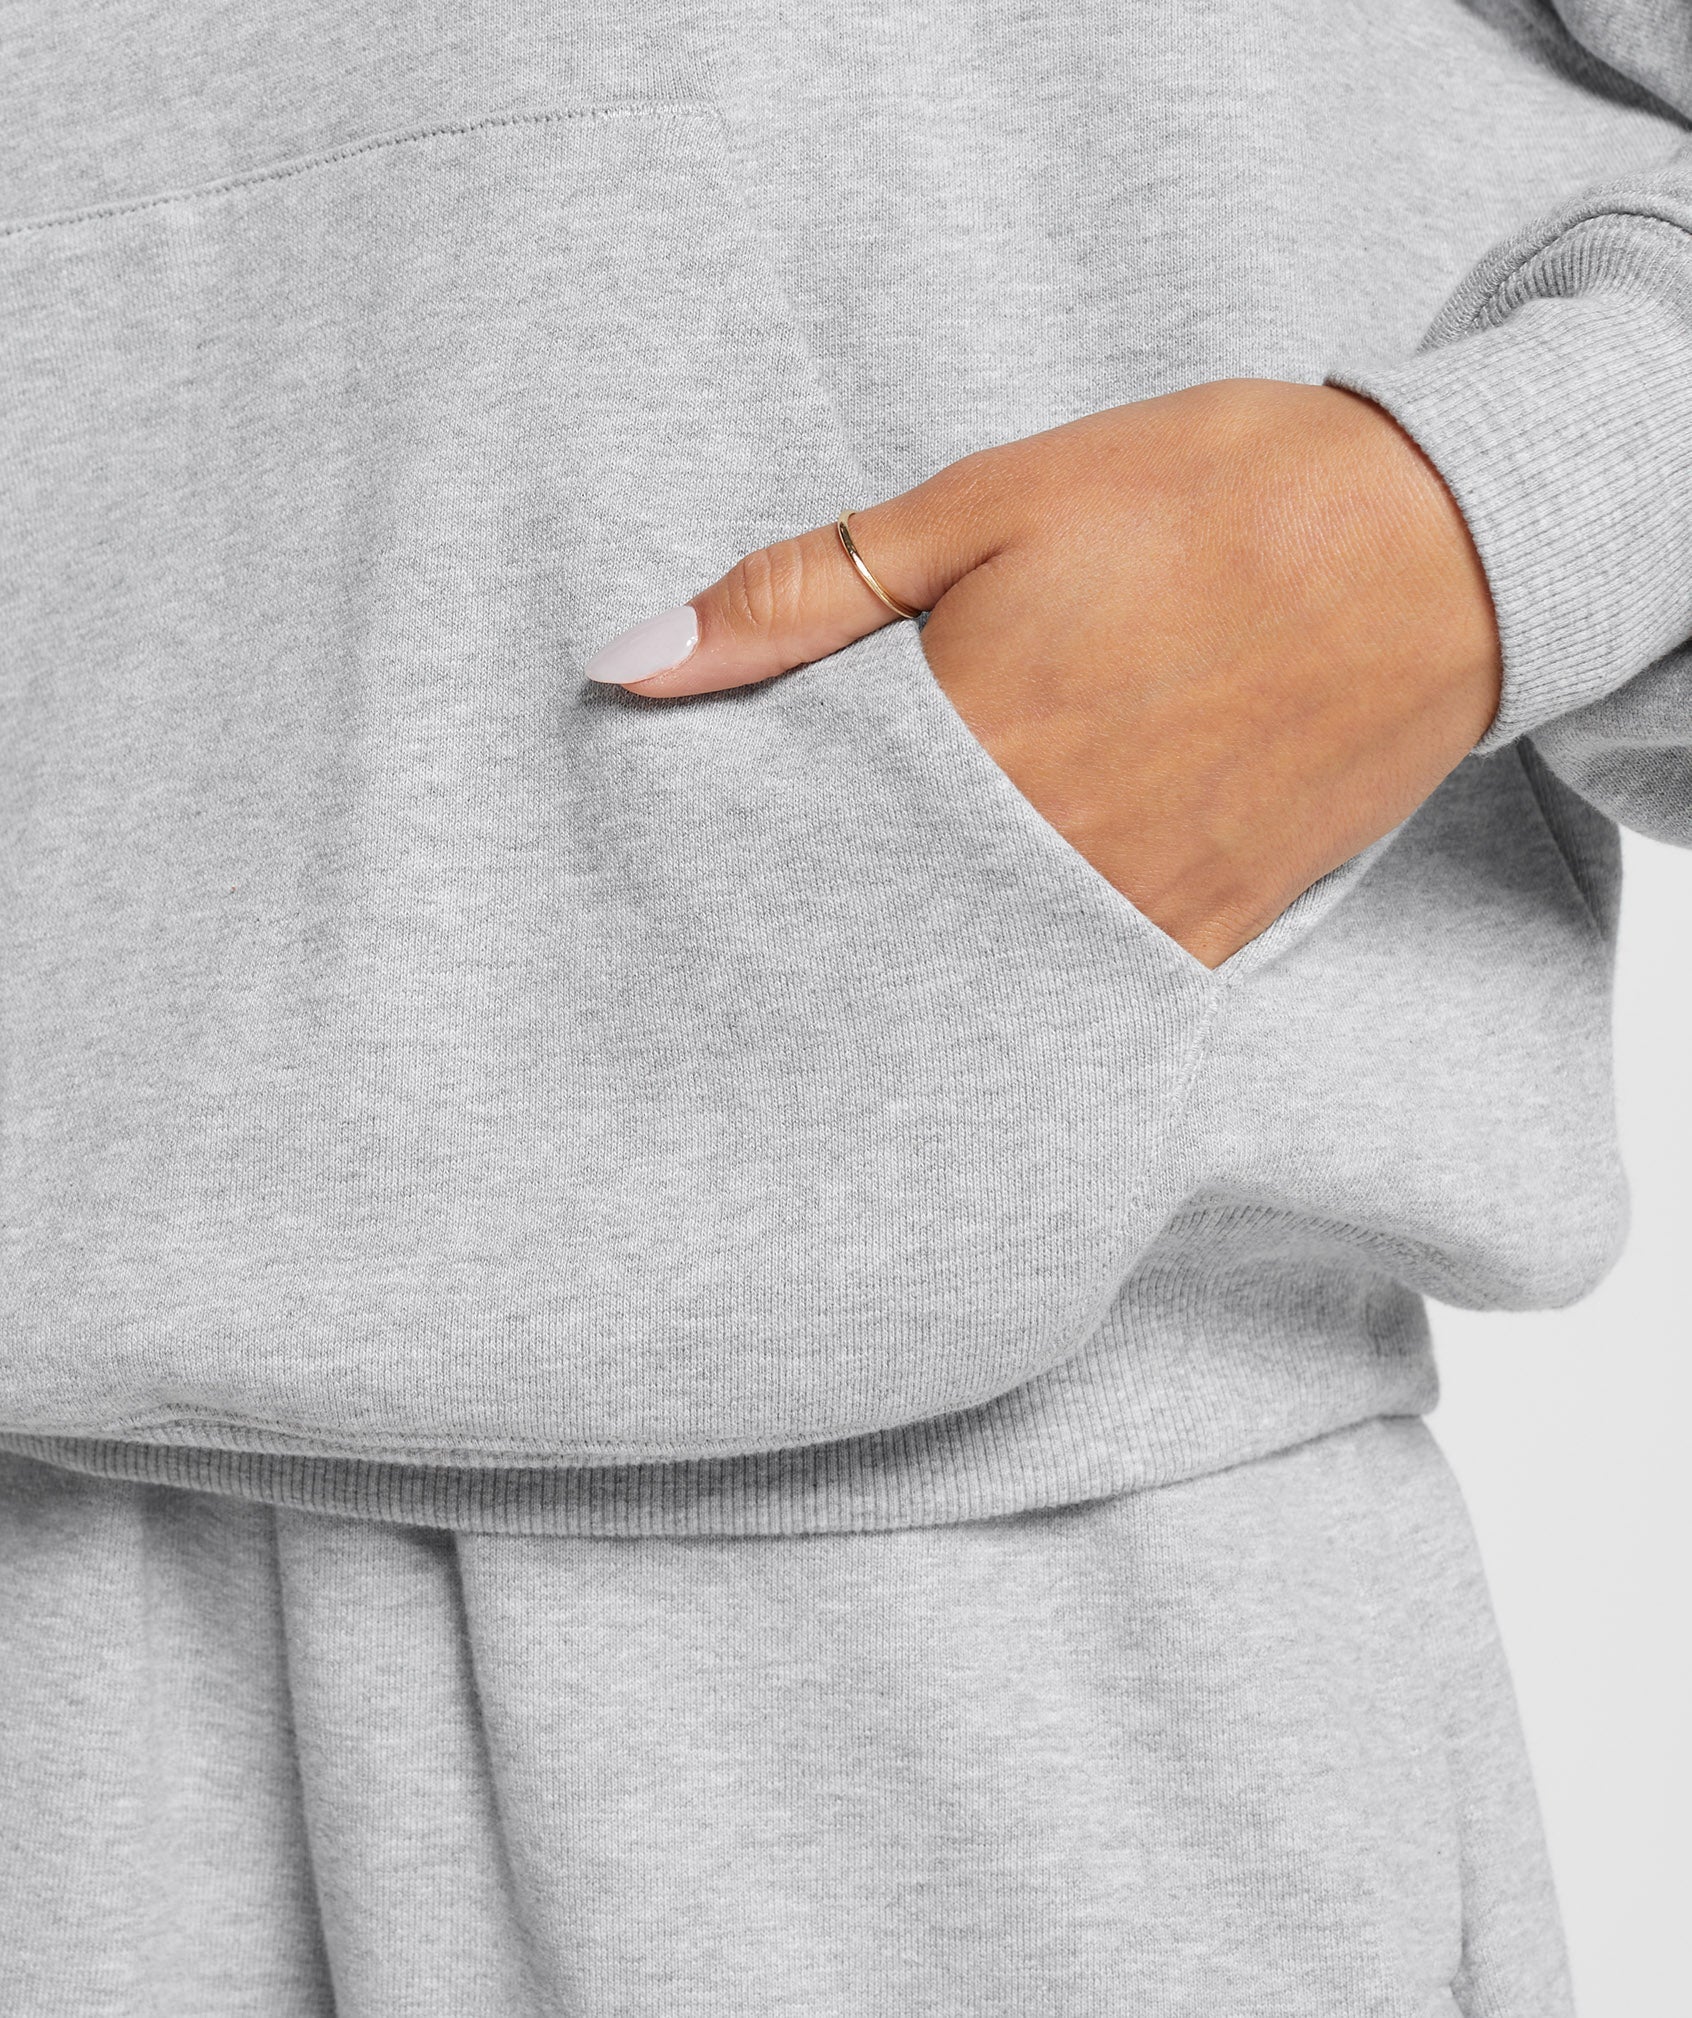 Rest Day Sweats 1/2 Zip Pullover in Light Grey Core Marl - view 7